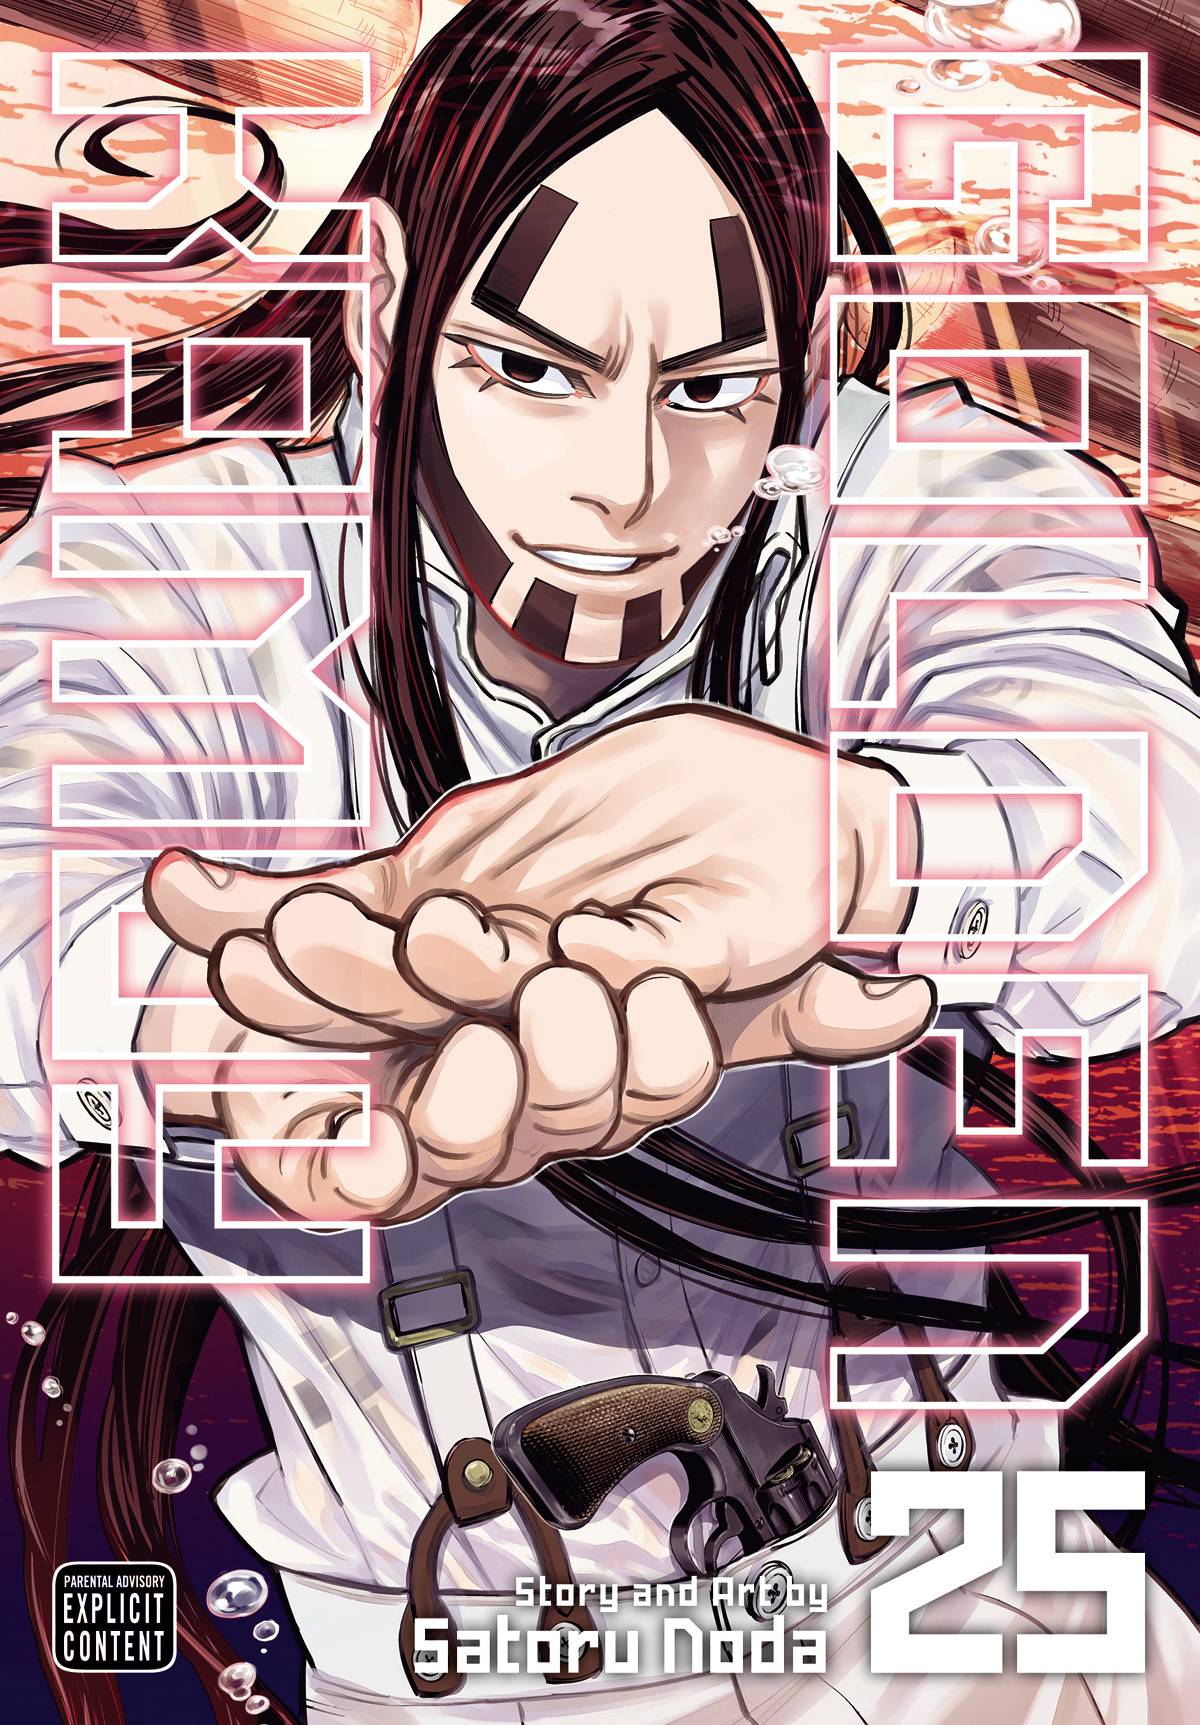 Golden Kamuy Gn Vol 25 - State of Comics